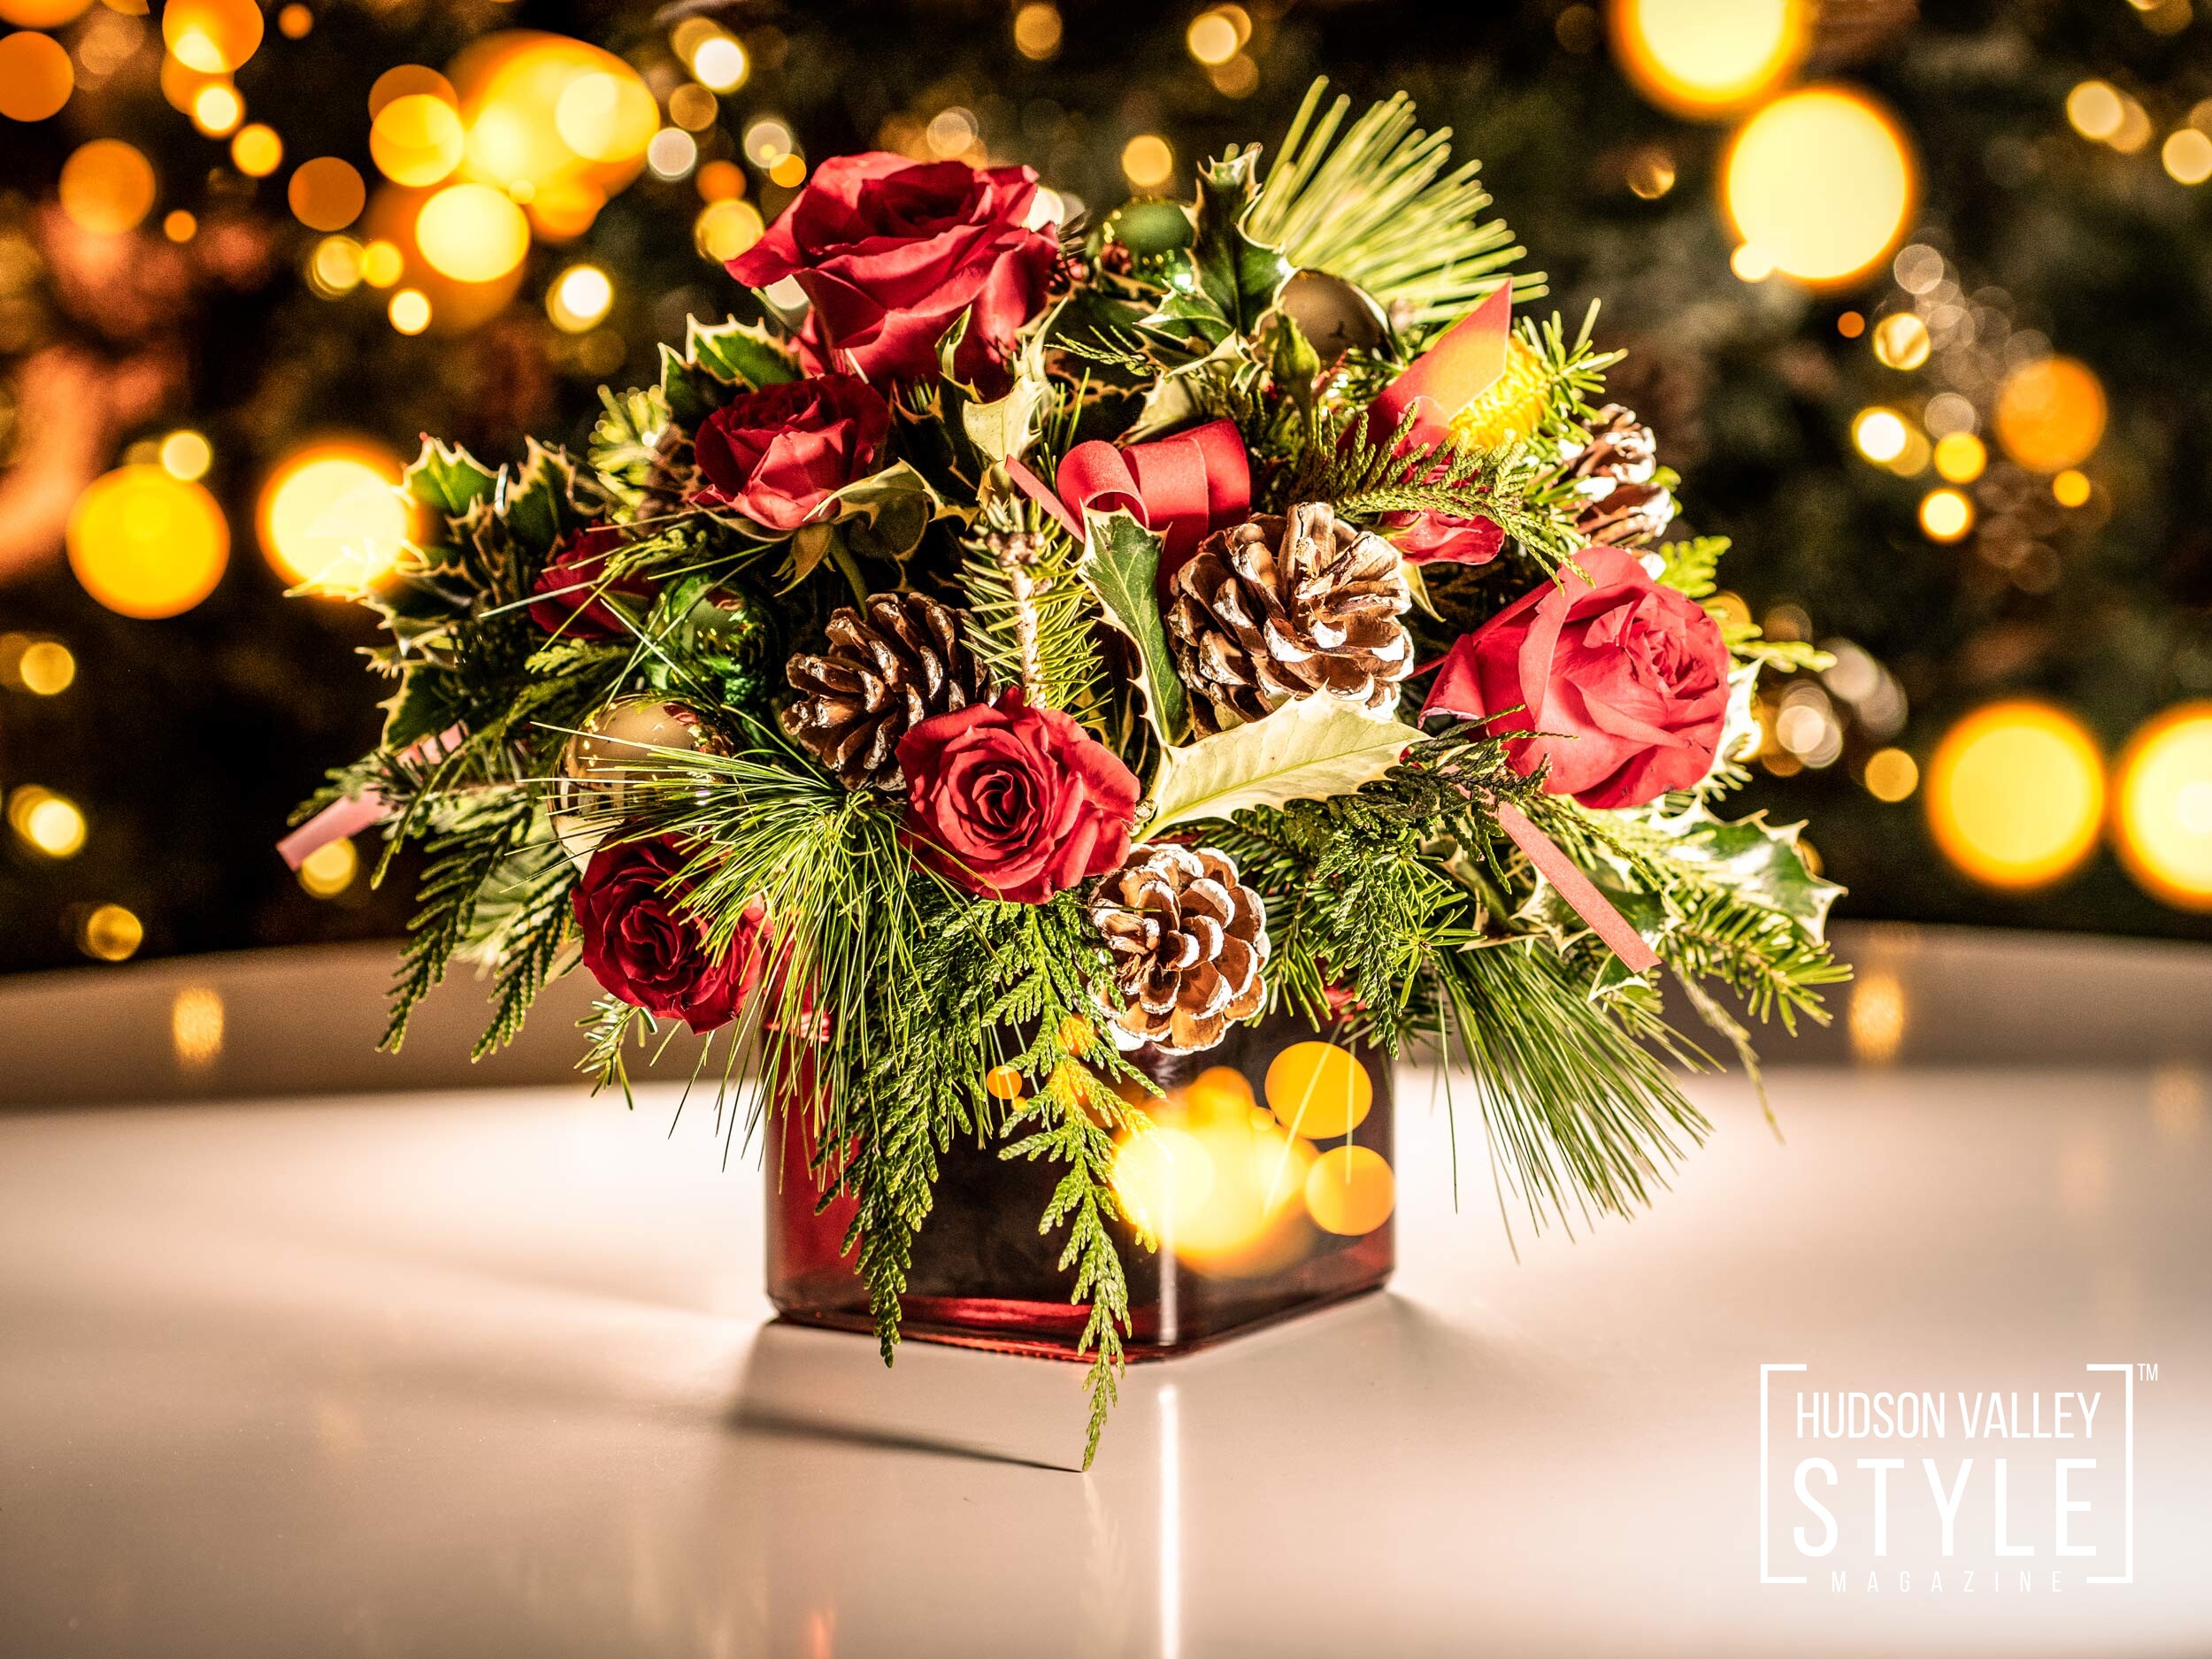 Mystic Rose Florist in Montgomery, NY - Hudson Valley Style Holiday Gift Guide